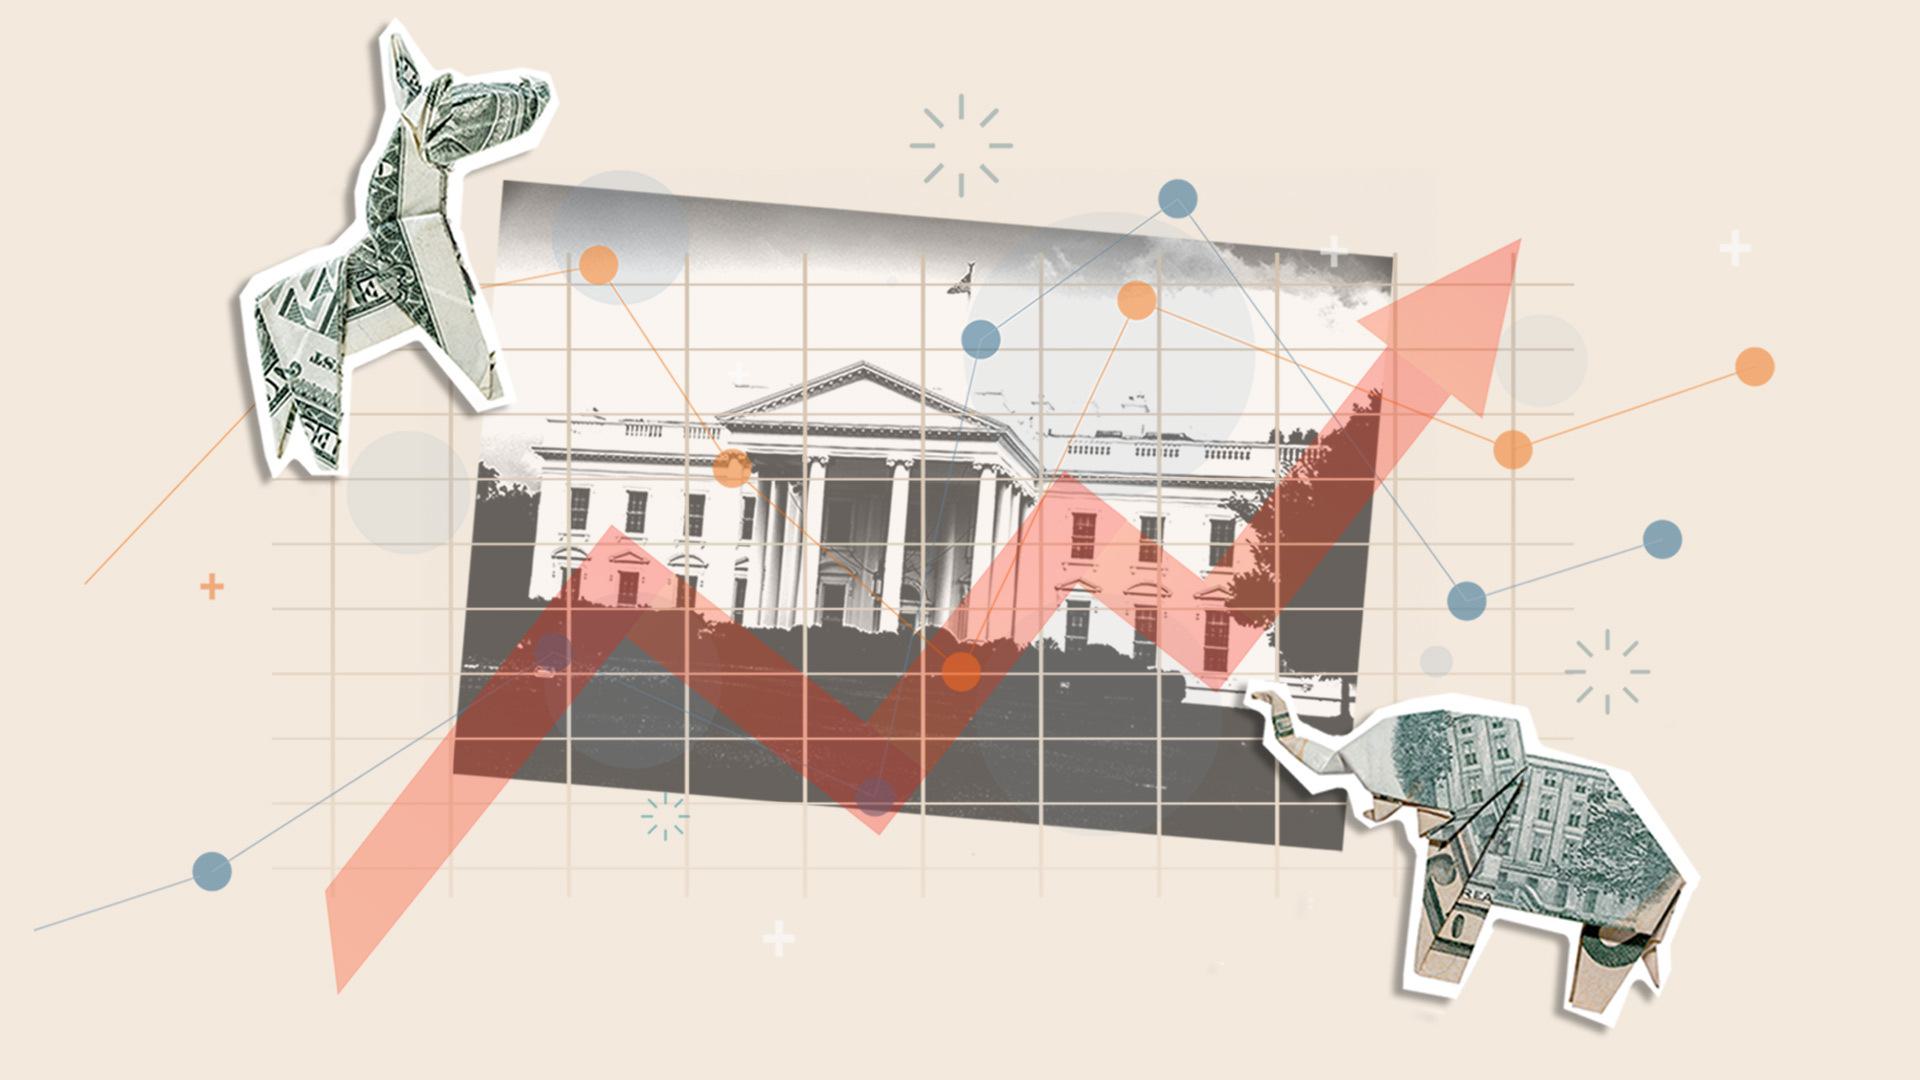 White House with arrow pointing up and origami donkey and elephant made from dollar bills